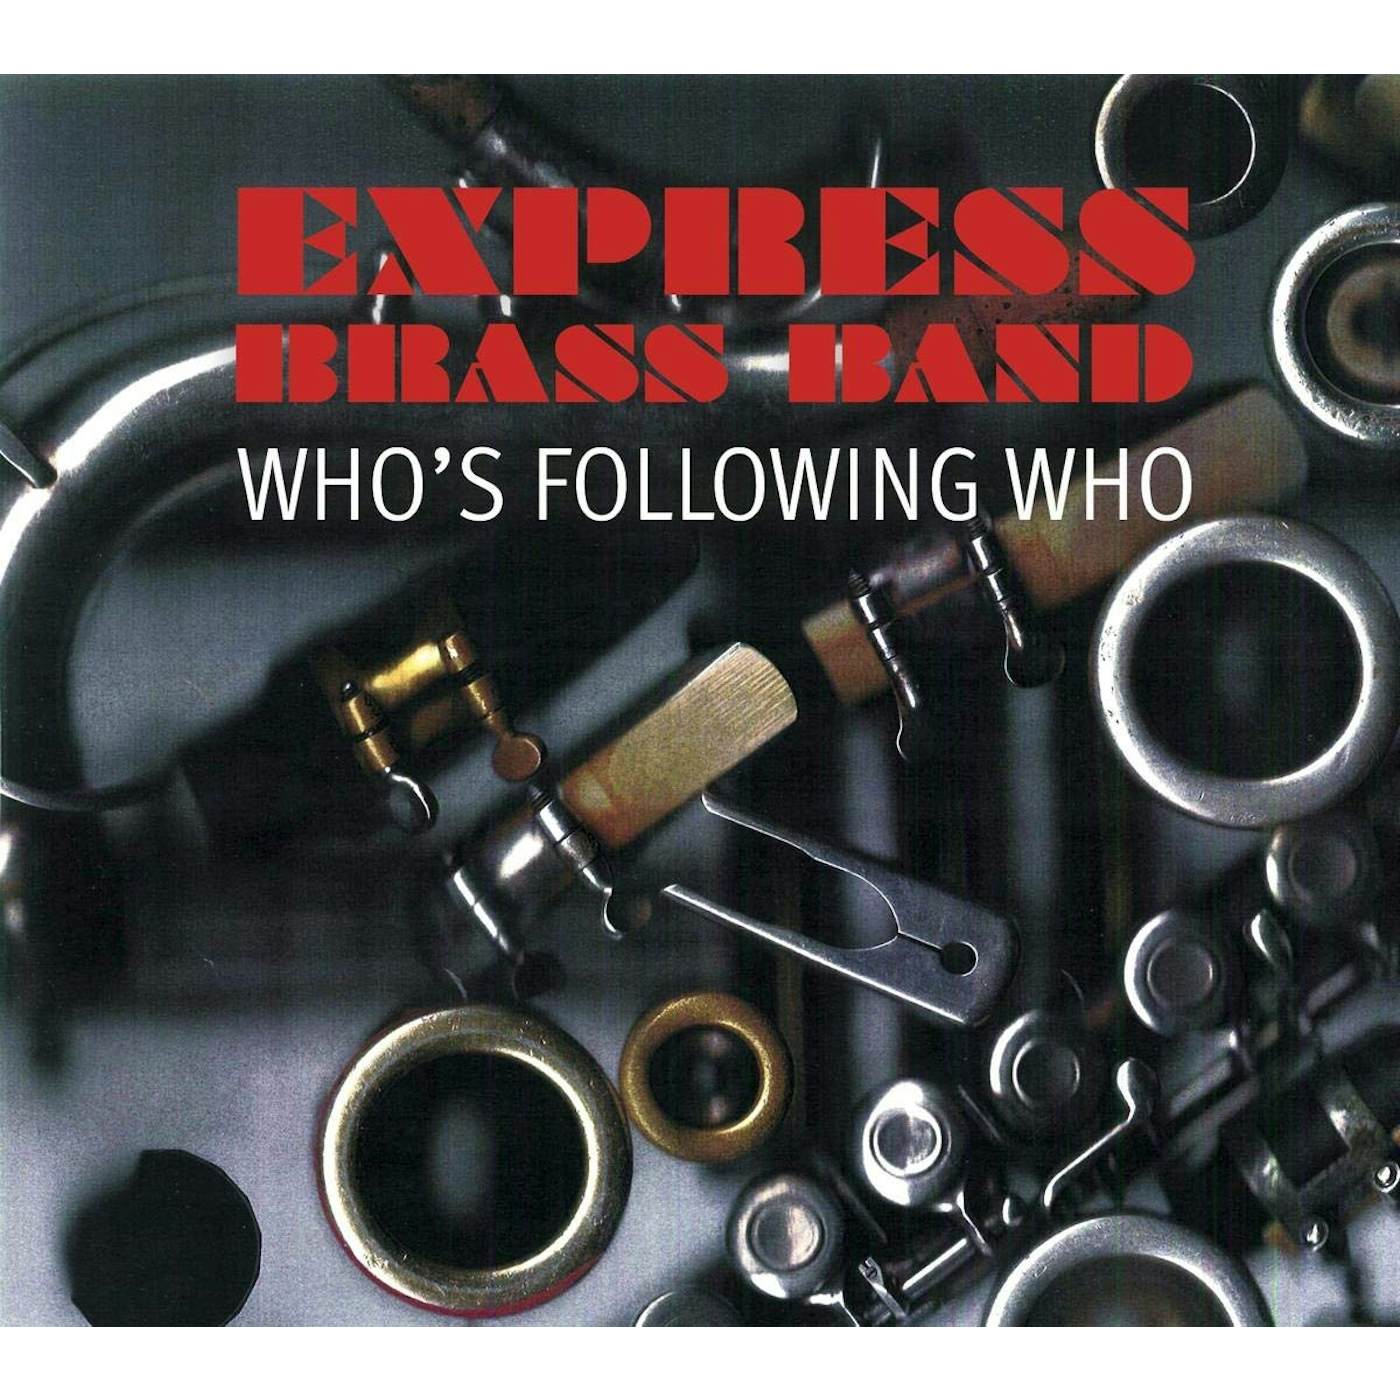 Express Brass Band Who's Following Who Vinyl Record